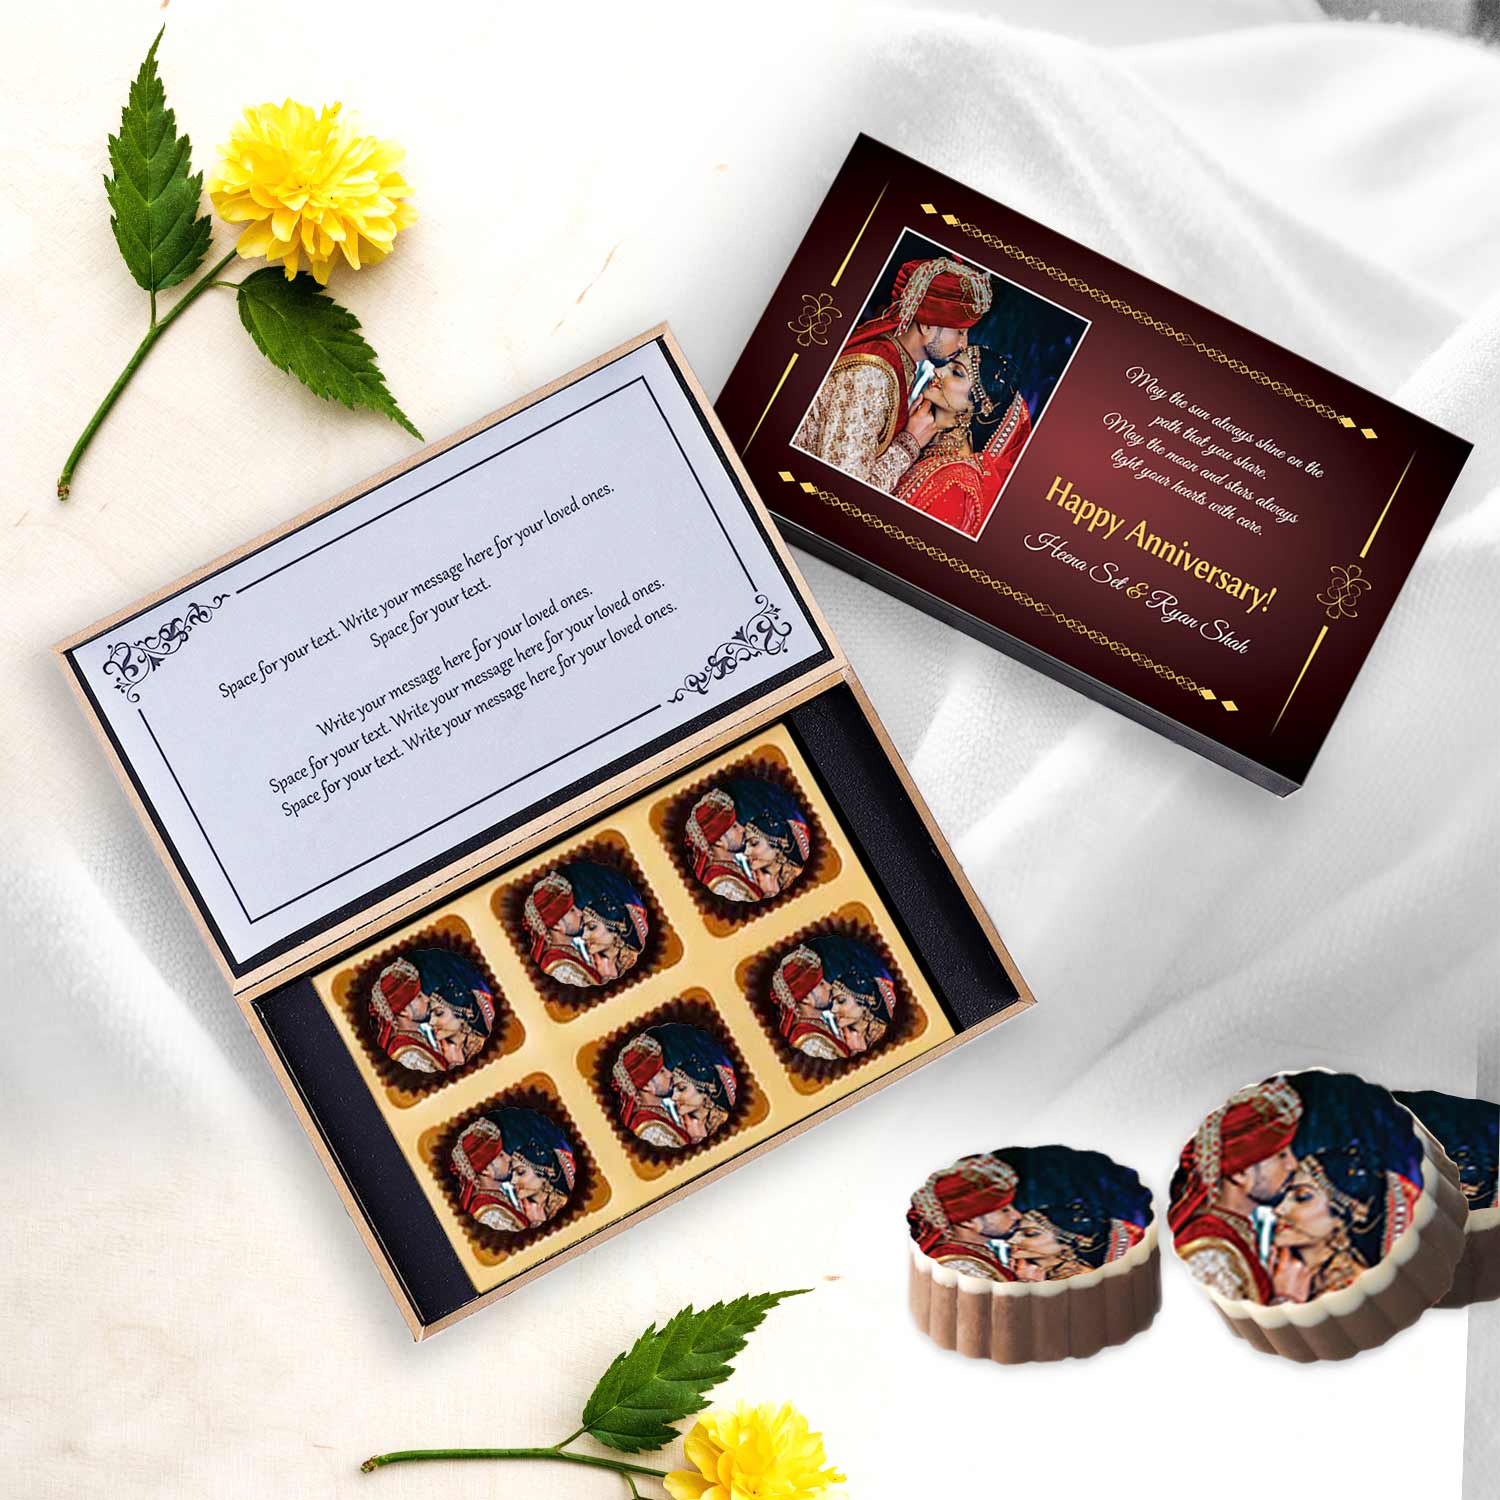 photo printed on chocolates and box with delicate border design